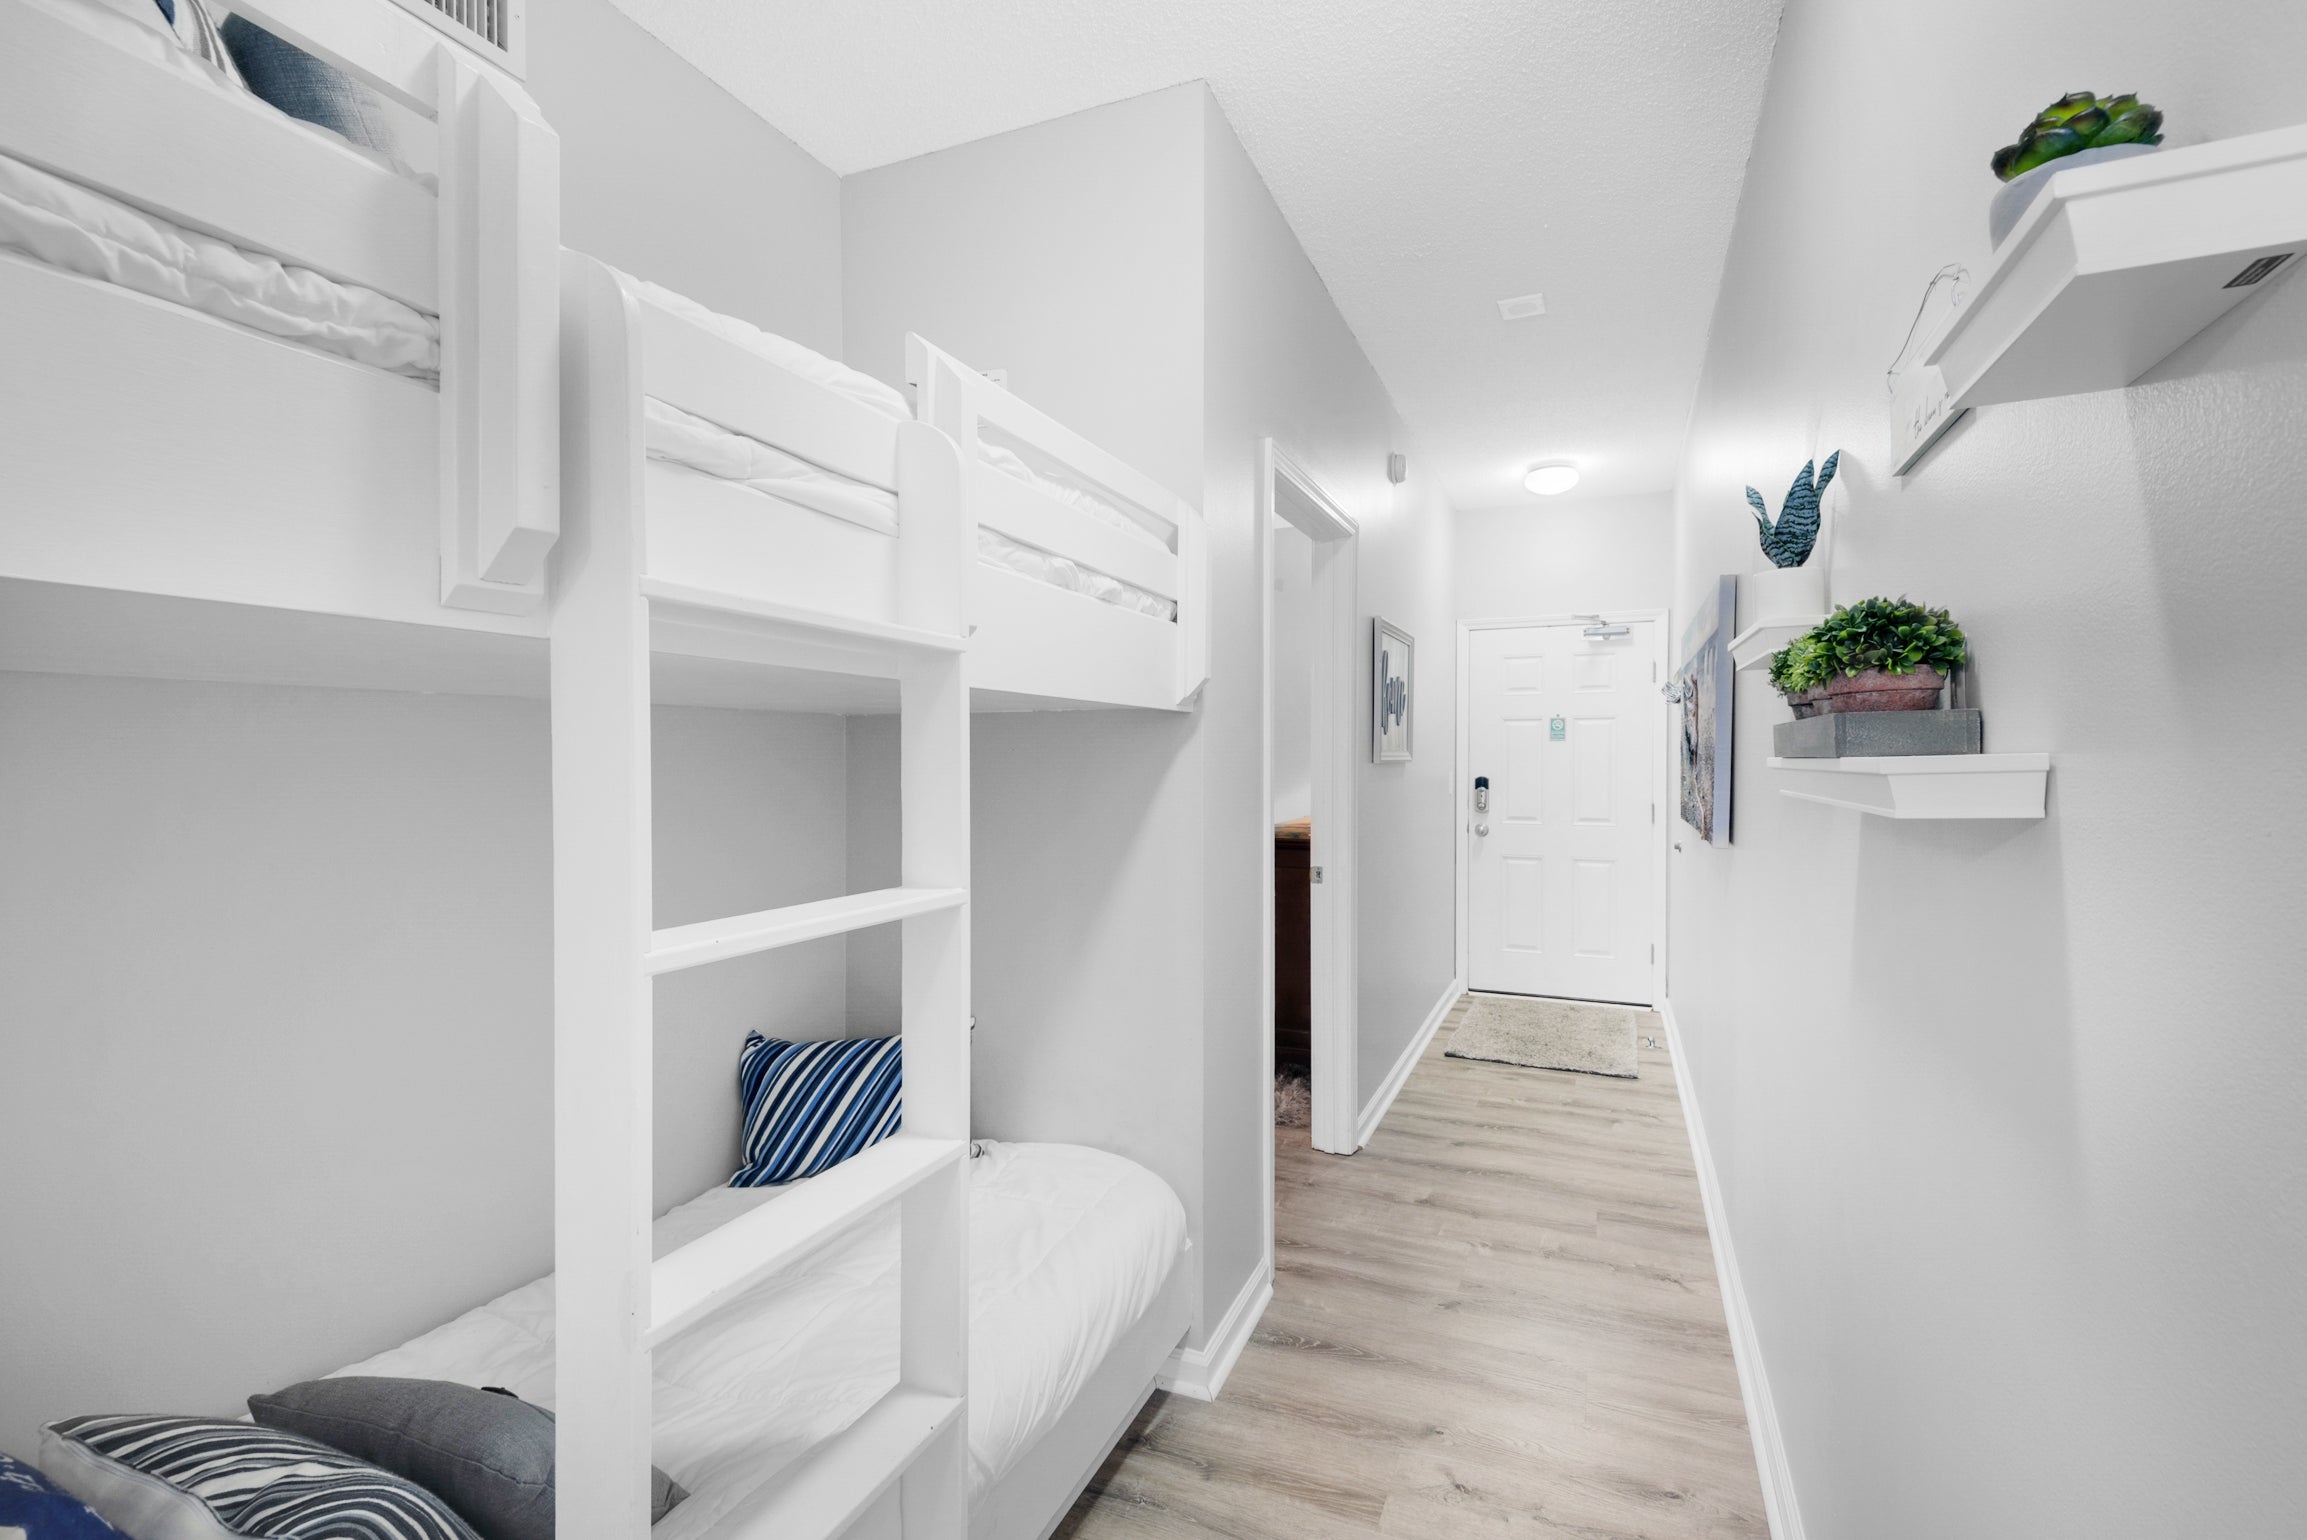 Great little bunk beds tucked away in the hall!